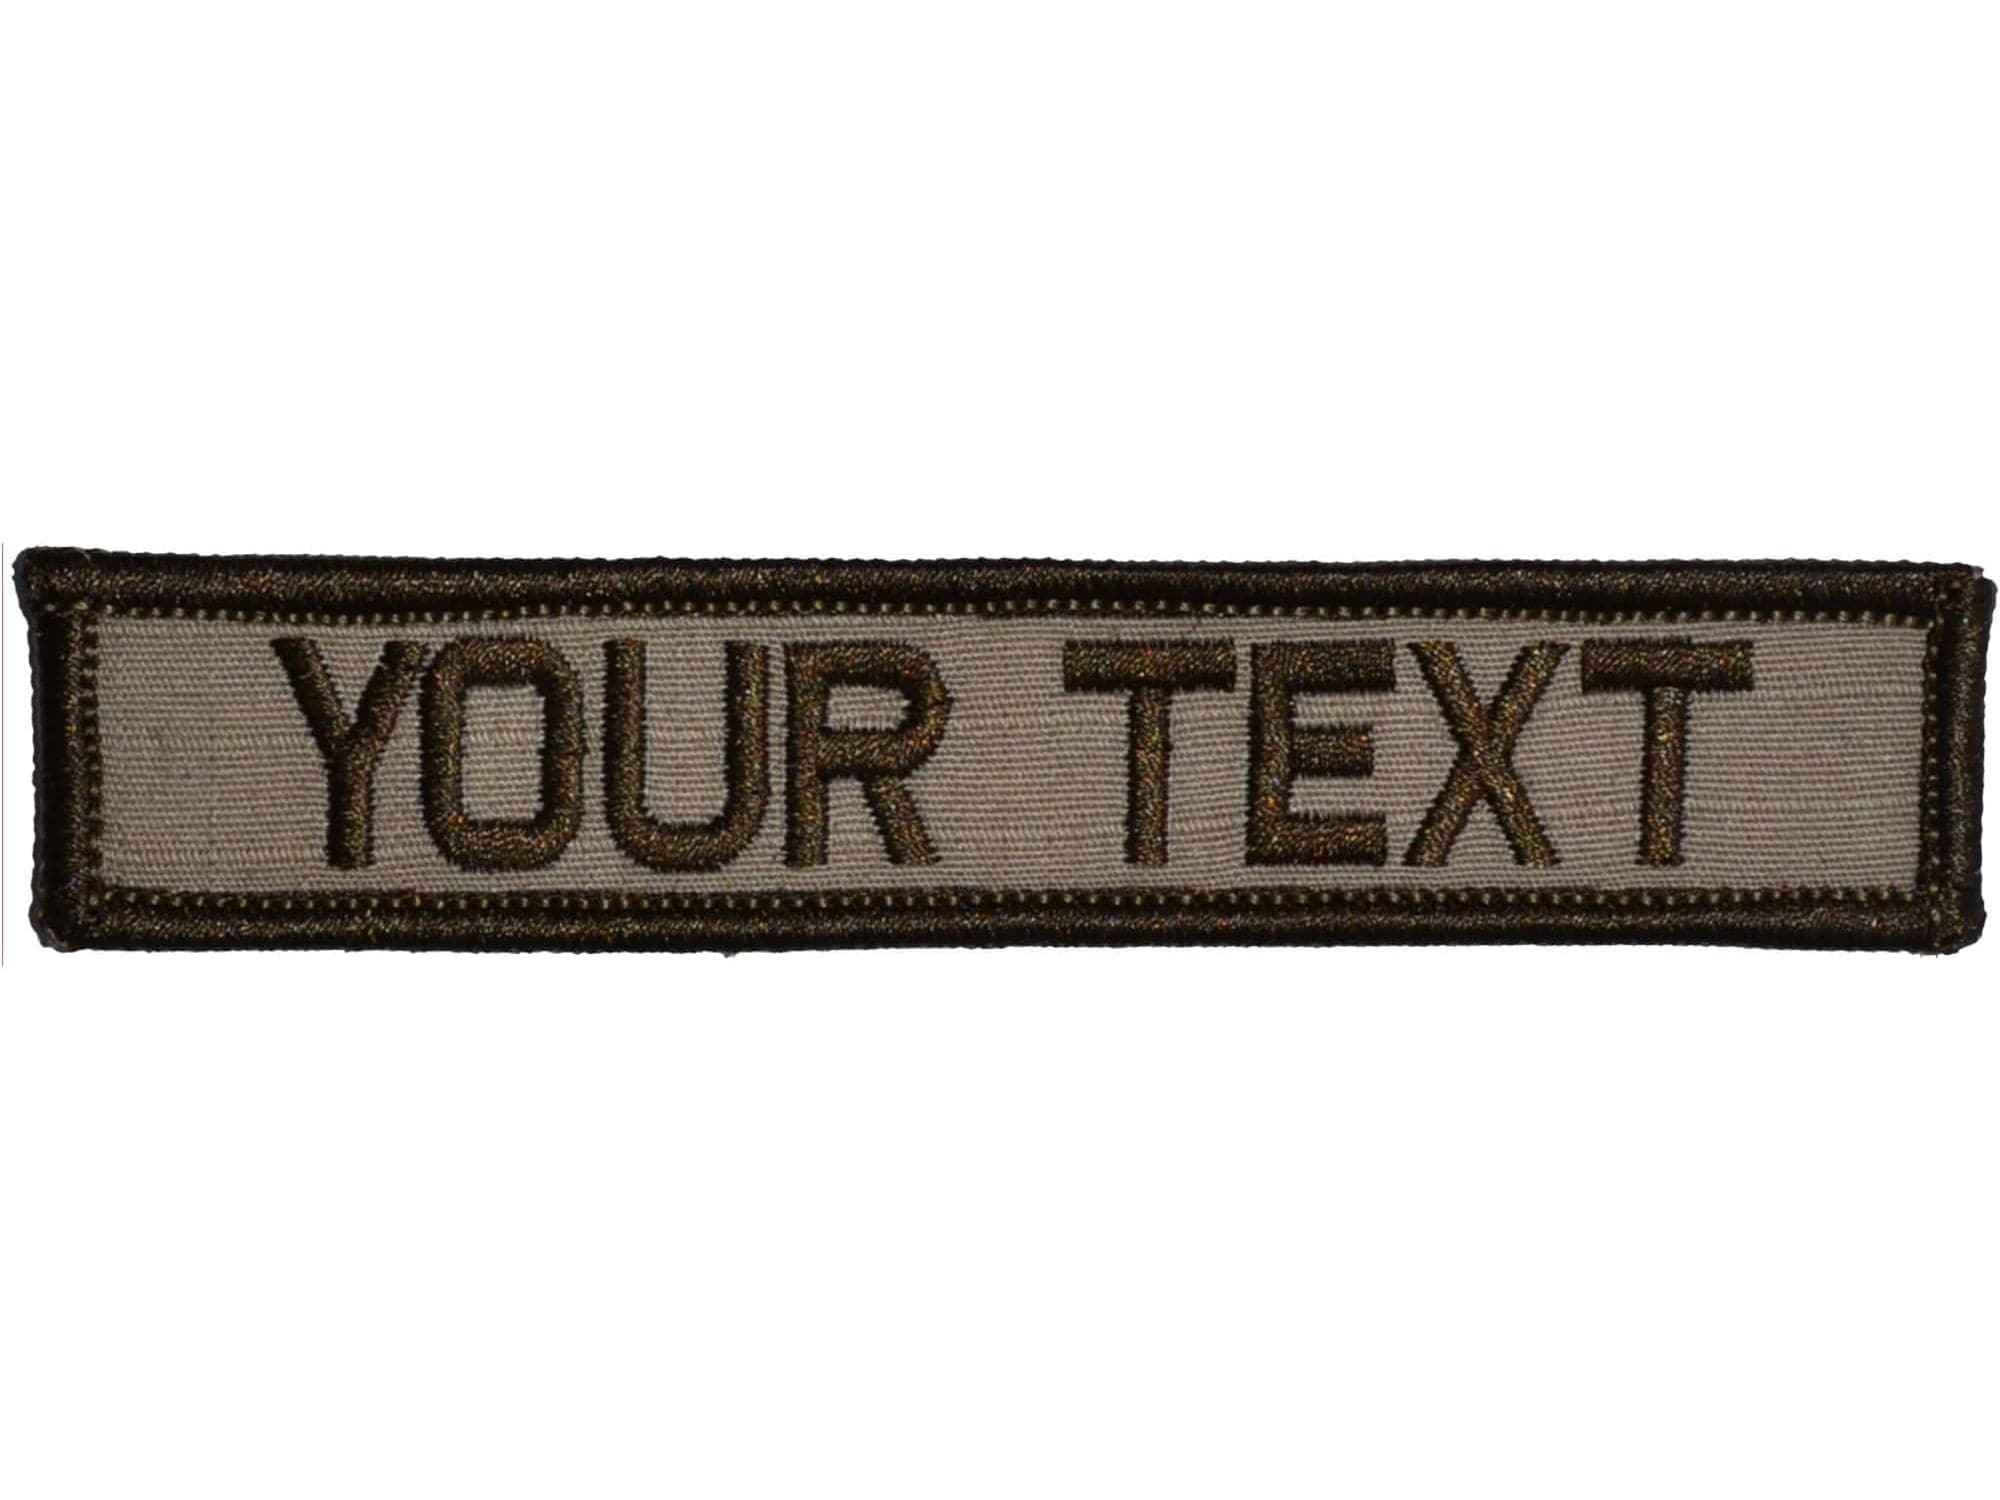 DVIDS - News - Boosting morale with a Velcro patch